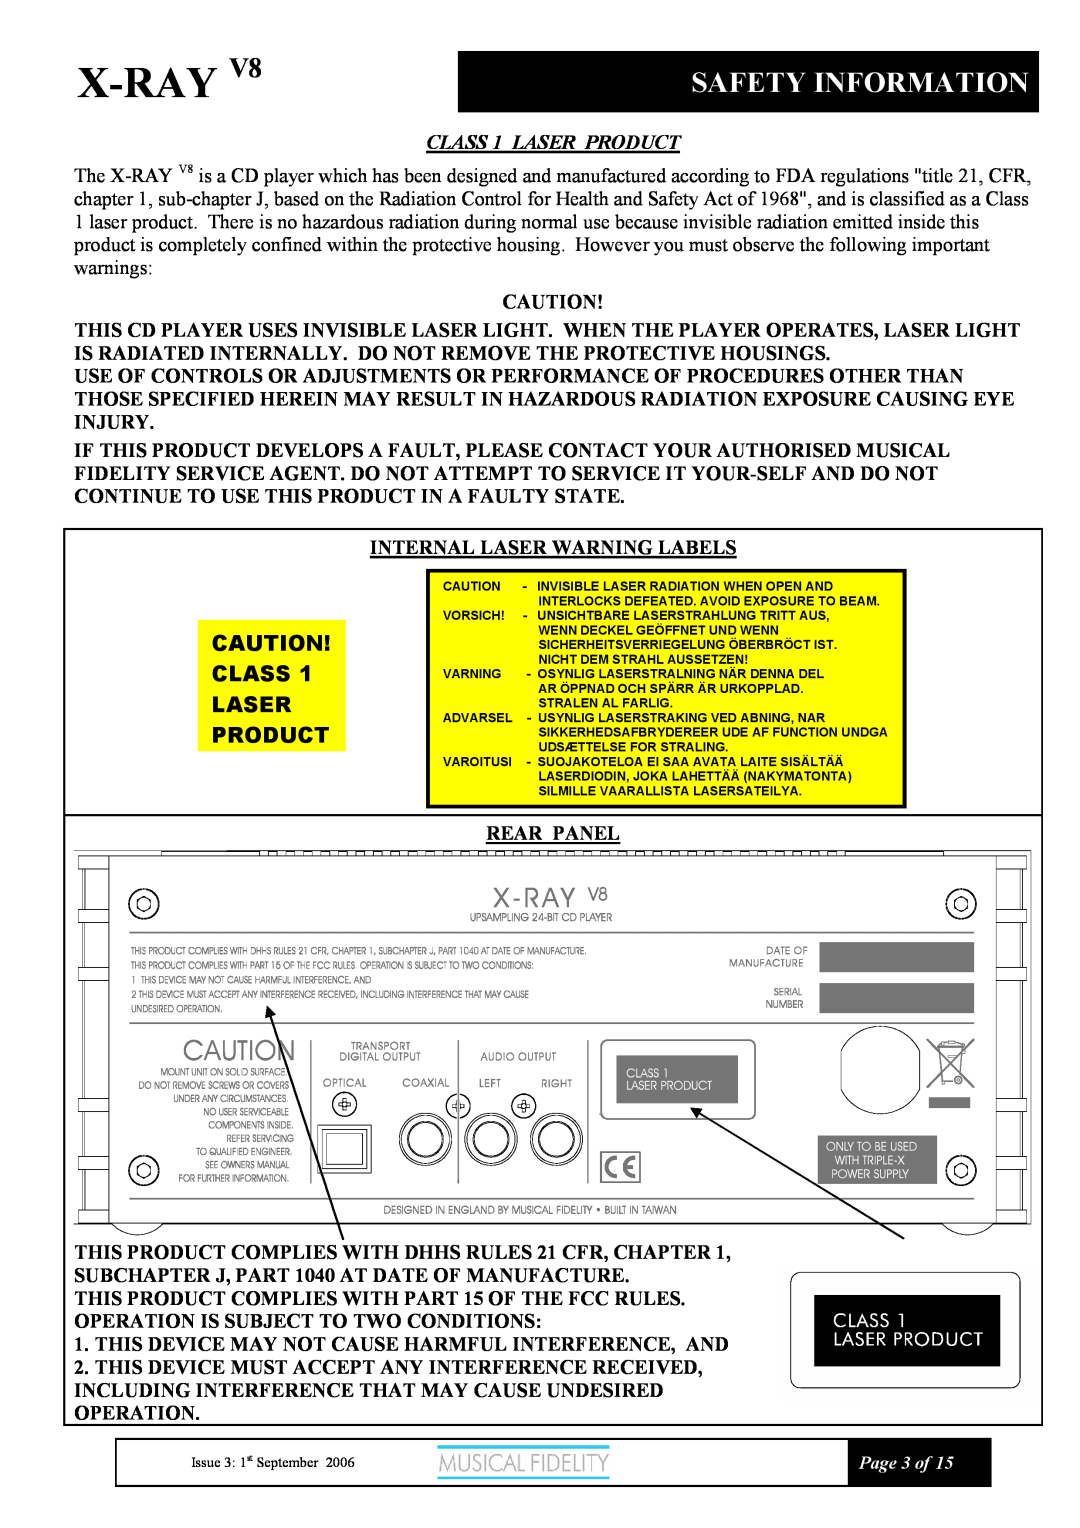 Musical Fidelity V8 manual Safety Information, X-Ray, CAUTION! CLASS 1 LASER PRODUCT 